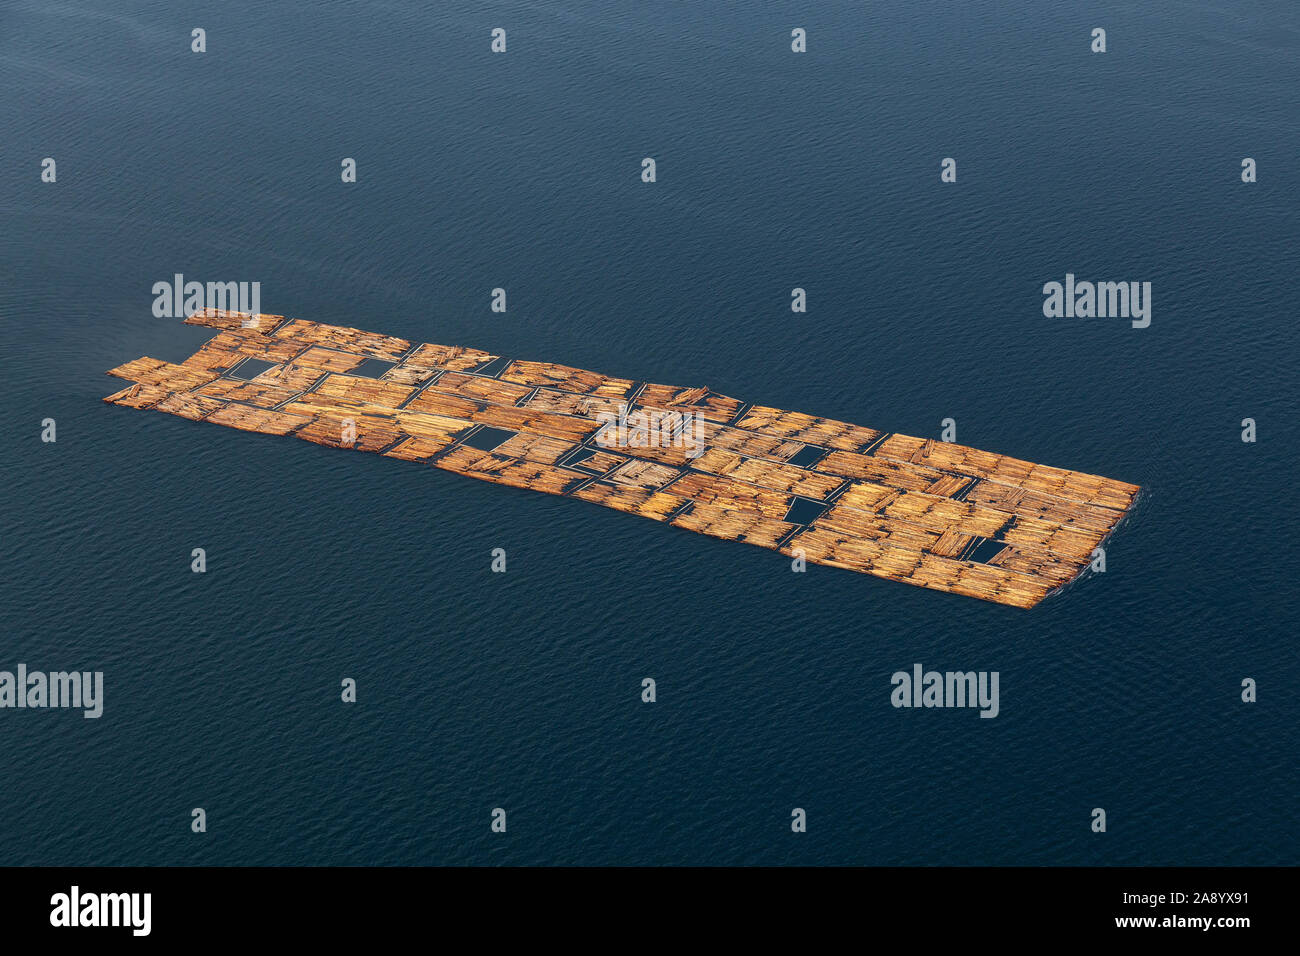 Aerial View of Tugboat towing Lumber in the ocean during a hazy summer day. Taken in Sunshine Coast, BC, Canada. Stock Photo